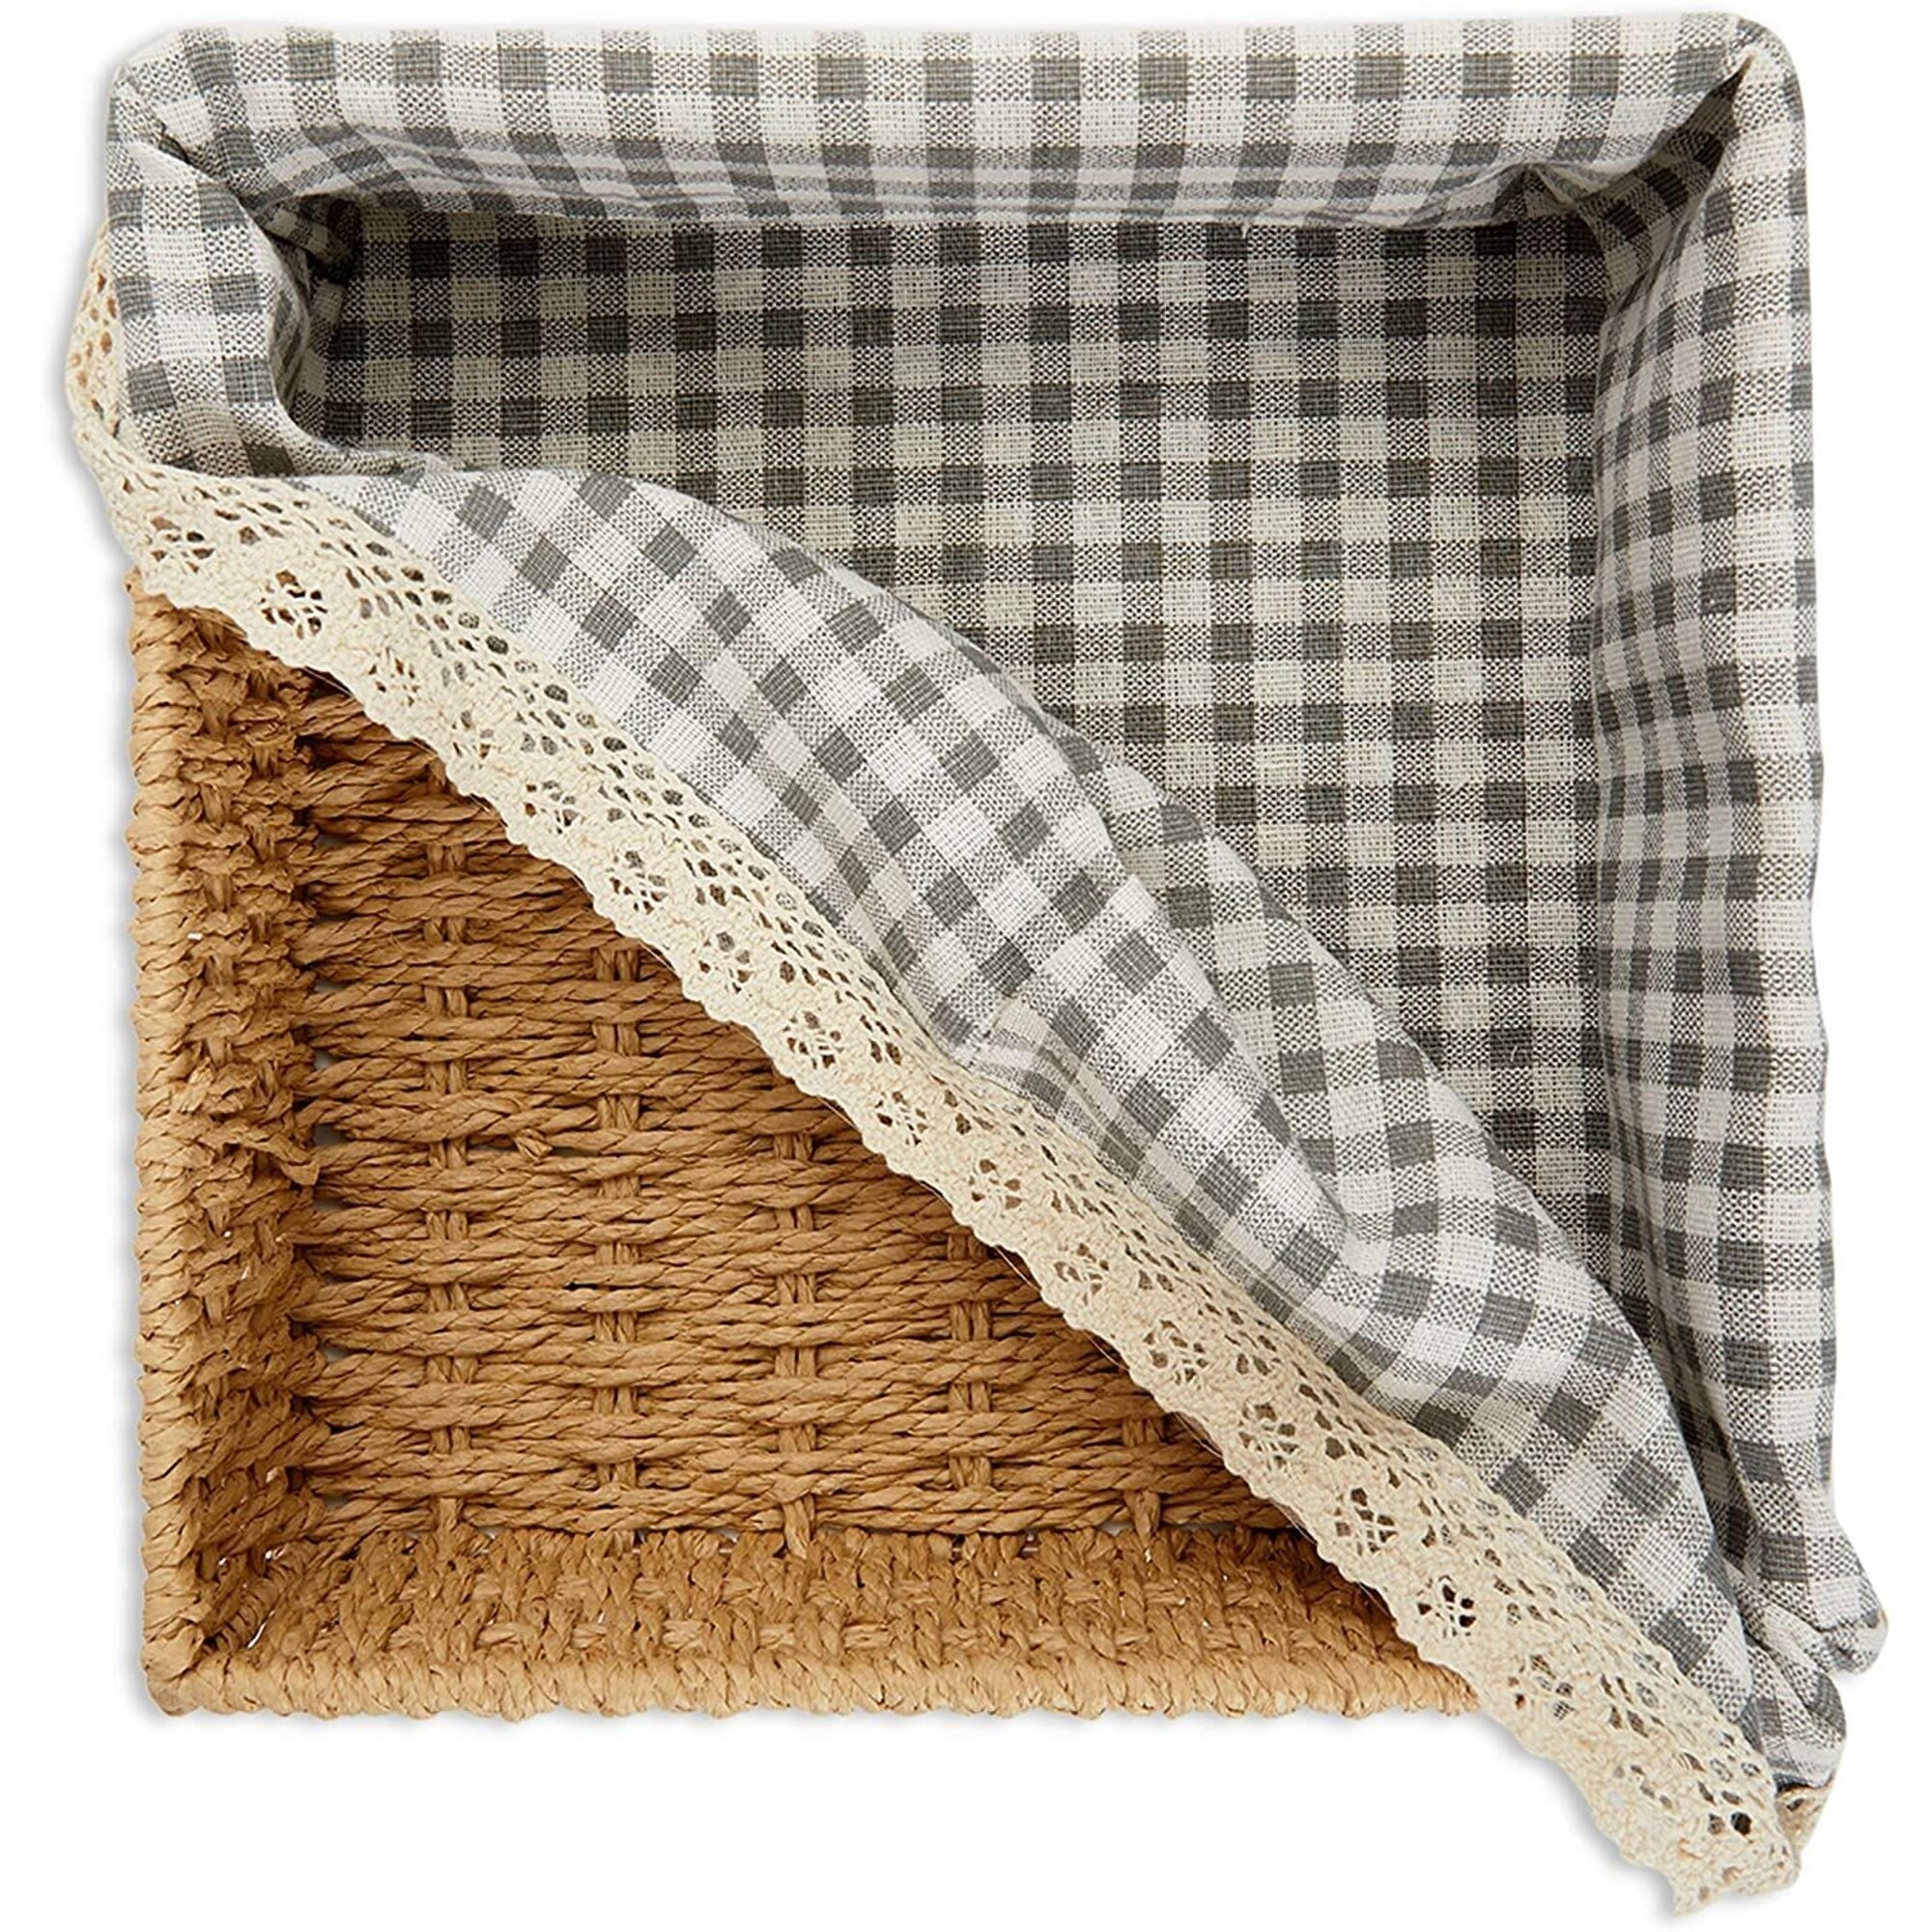 https://ak1.ostkcdn.com/images/products/is/images/direct/3193a6cb600adcc46f87b747d0835e35fdad0a26/Farmlyn-Creek-Woven-Wicker-Storage-Baskets-with-Removable-Liner-%283-Sizes%2C-3-Pack%29.jpg